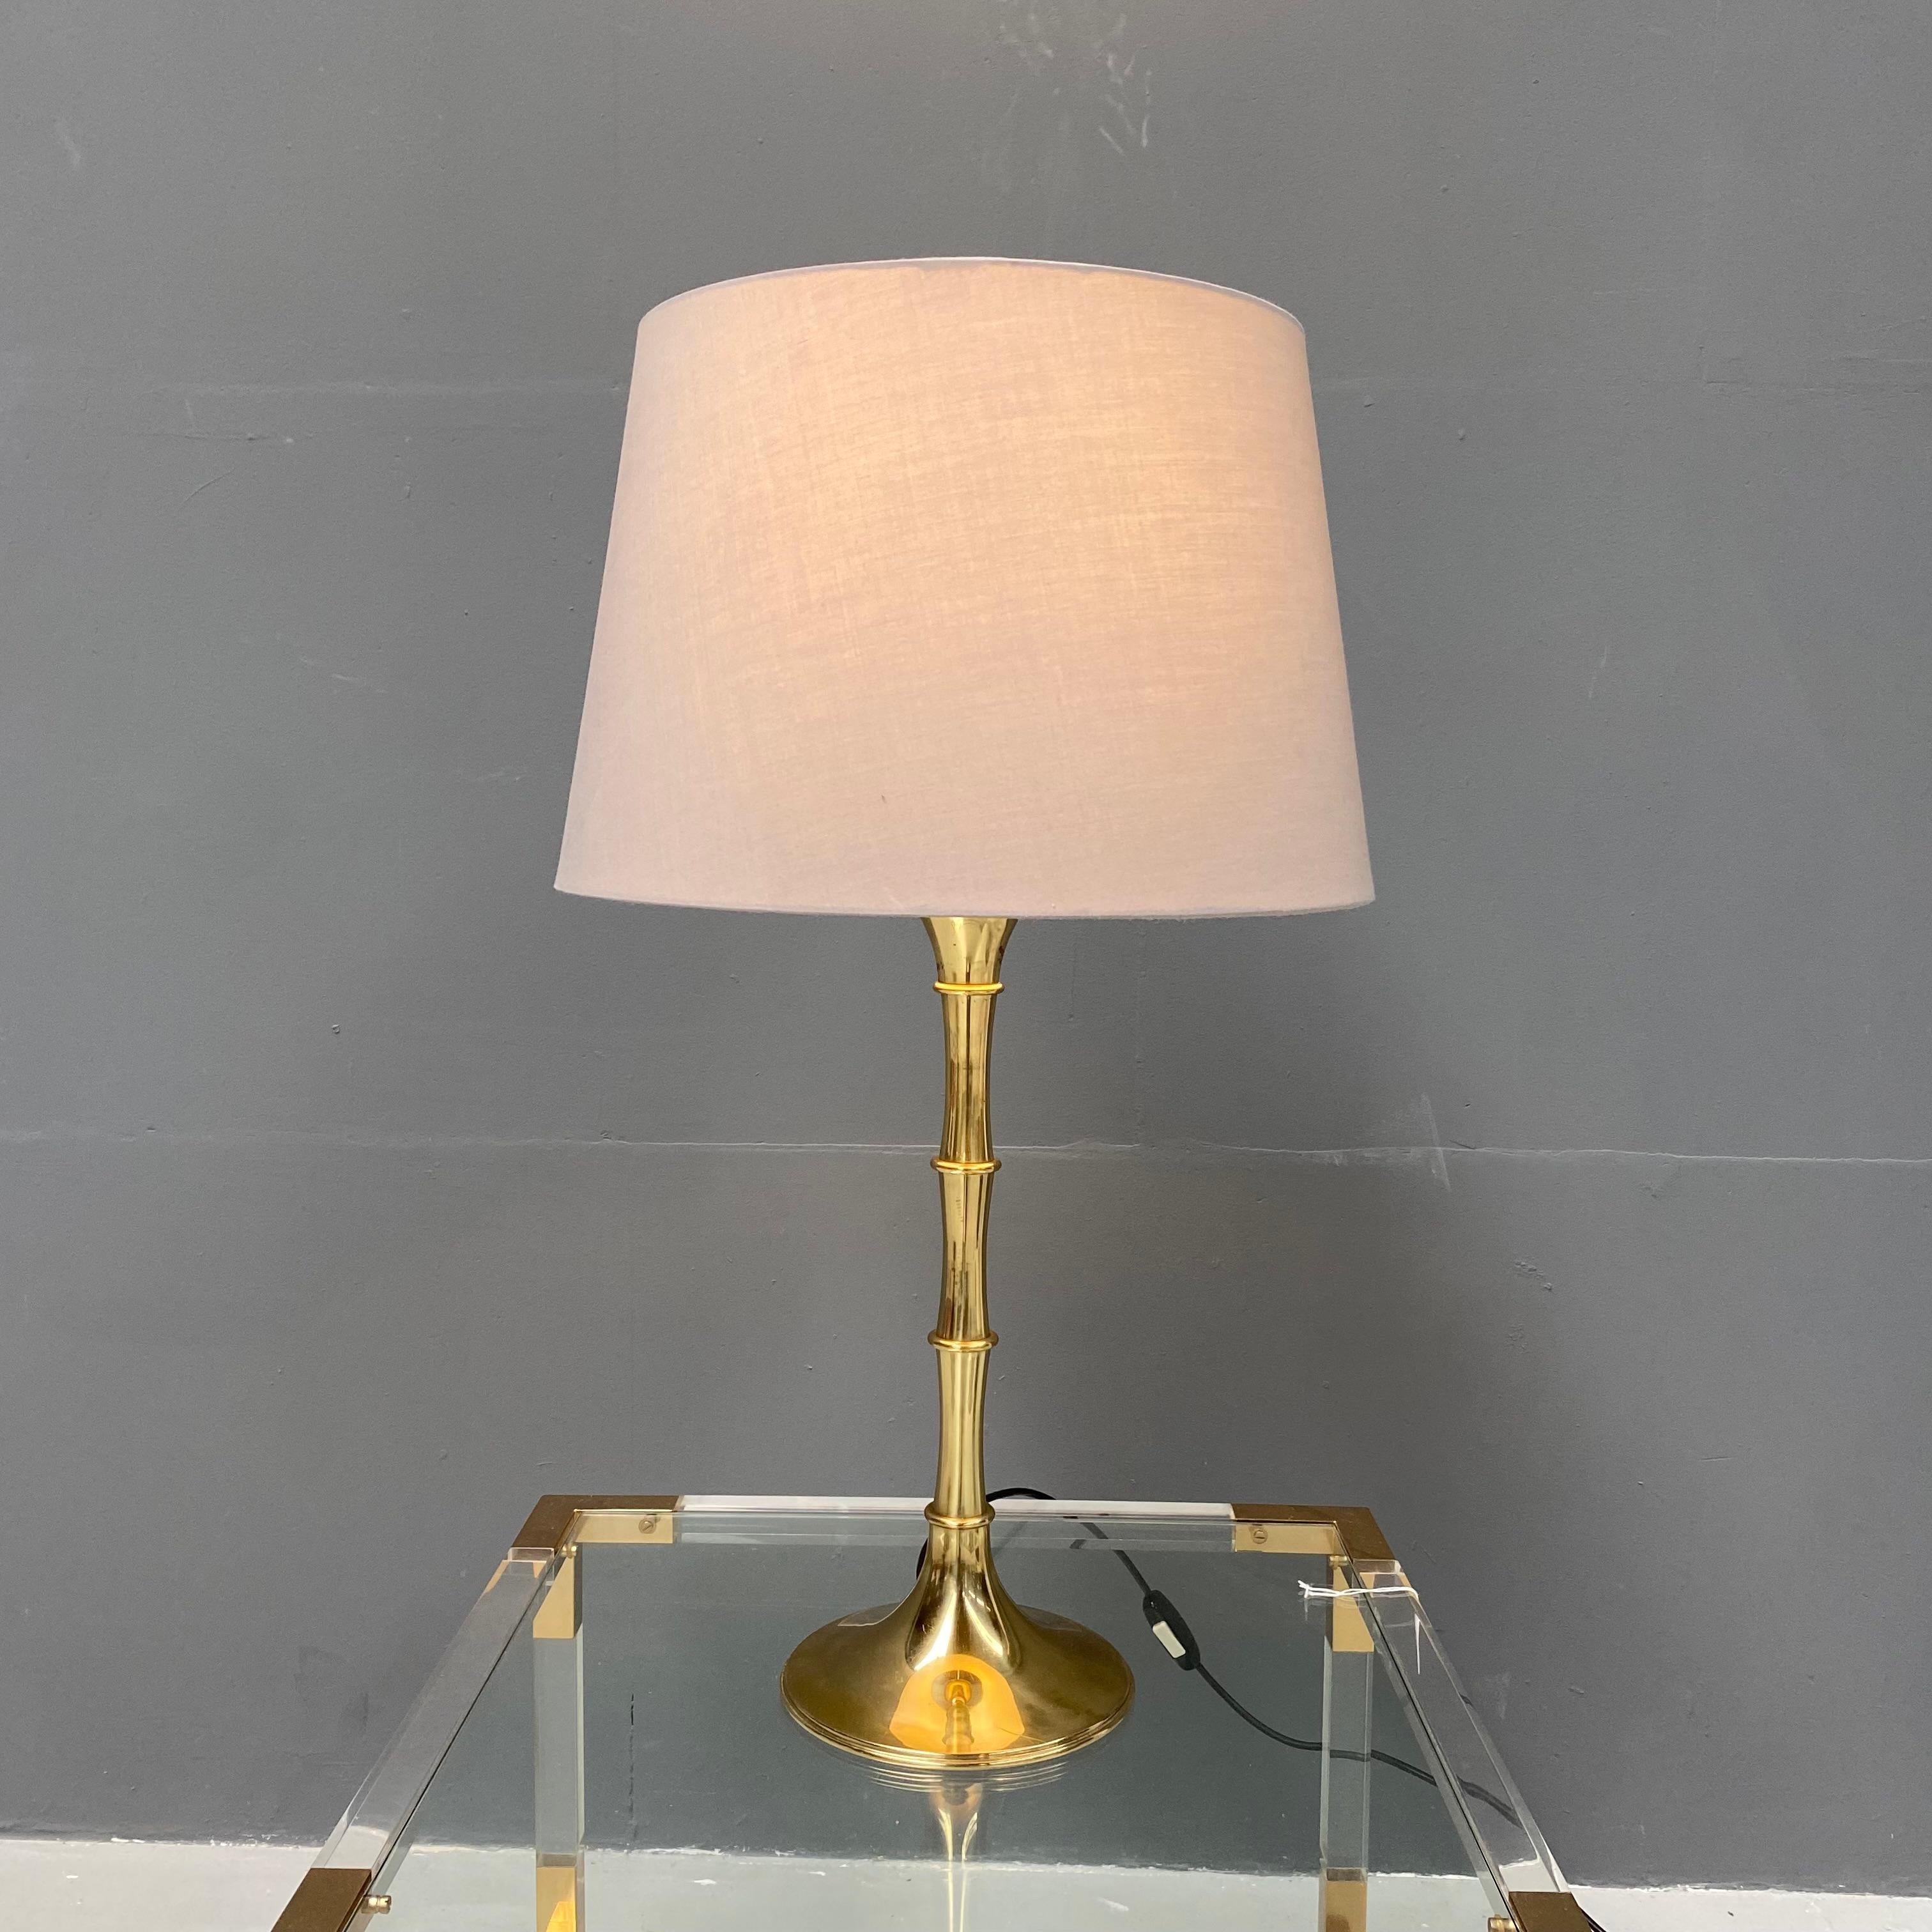 This Brass table lamp with bamboo base was designed by Ingo Maurer in Germany. Manufactured by M Design in the sixties. In good condition.